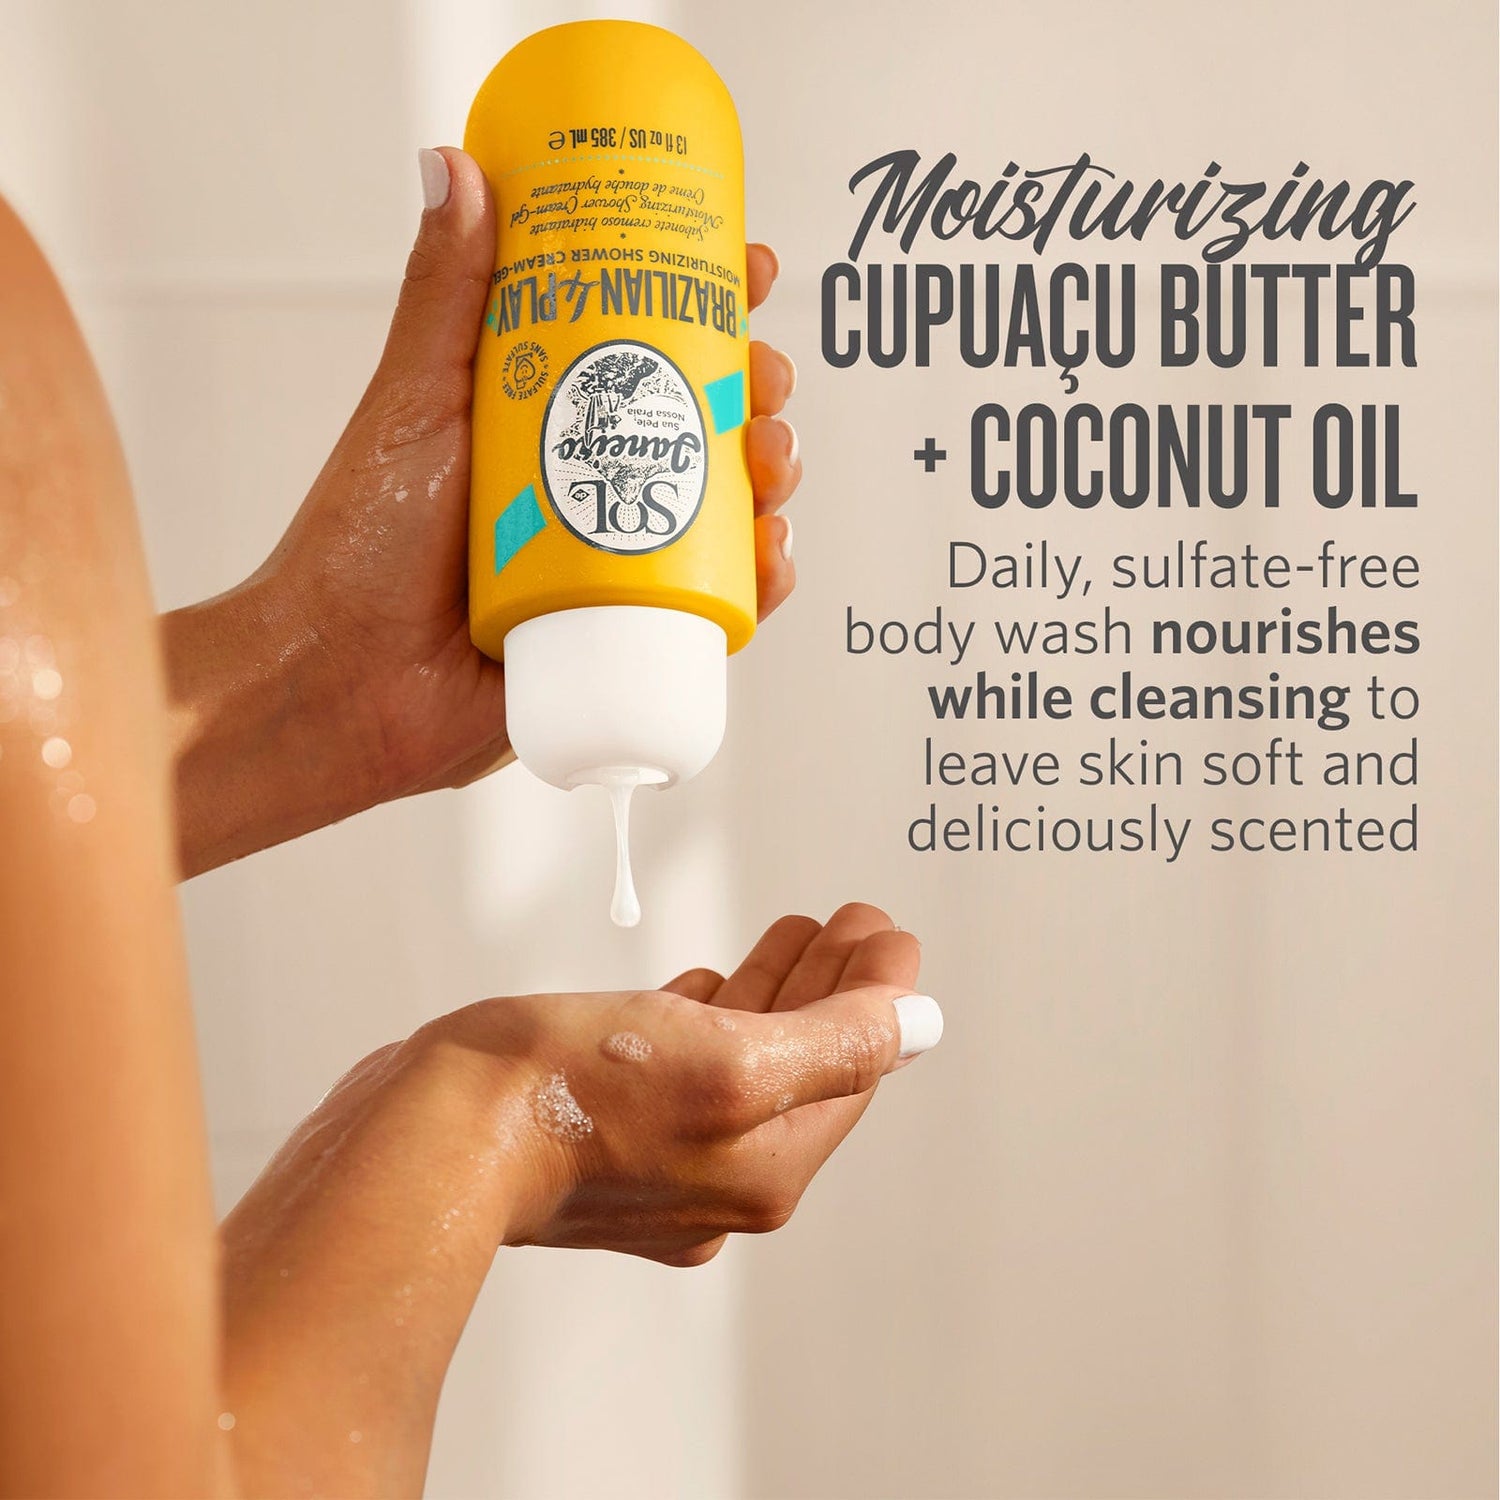 moisturizing cupuacu butter + coconut oil - Daily, sulfate-free body wash nourishes while cleansing to leave skin soft and deliciously scented